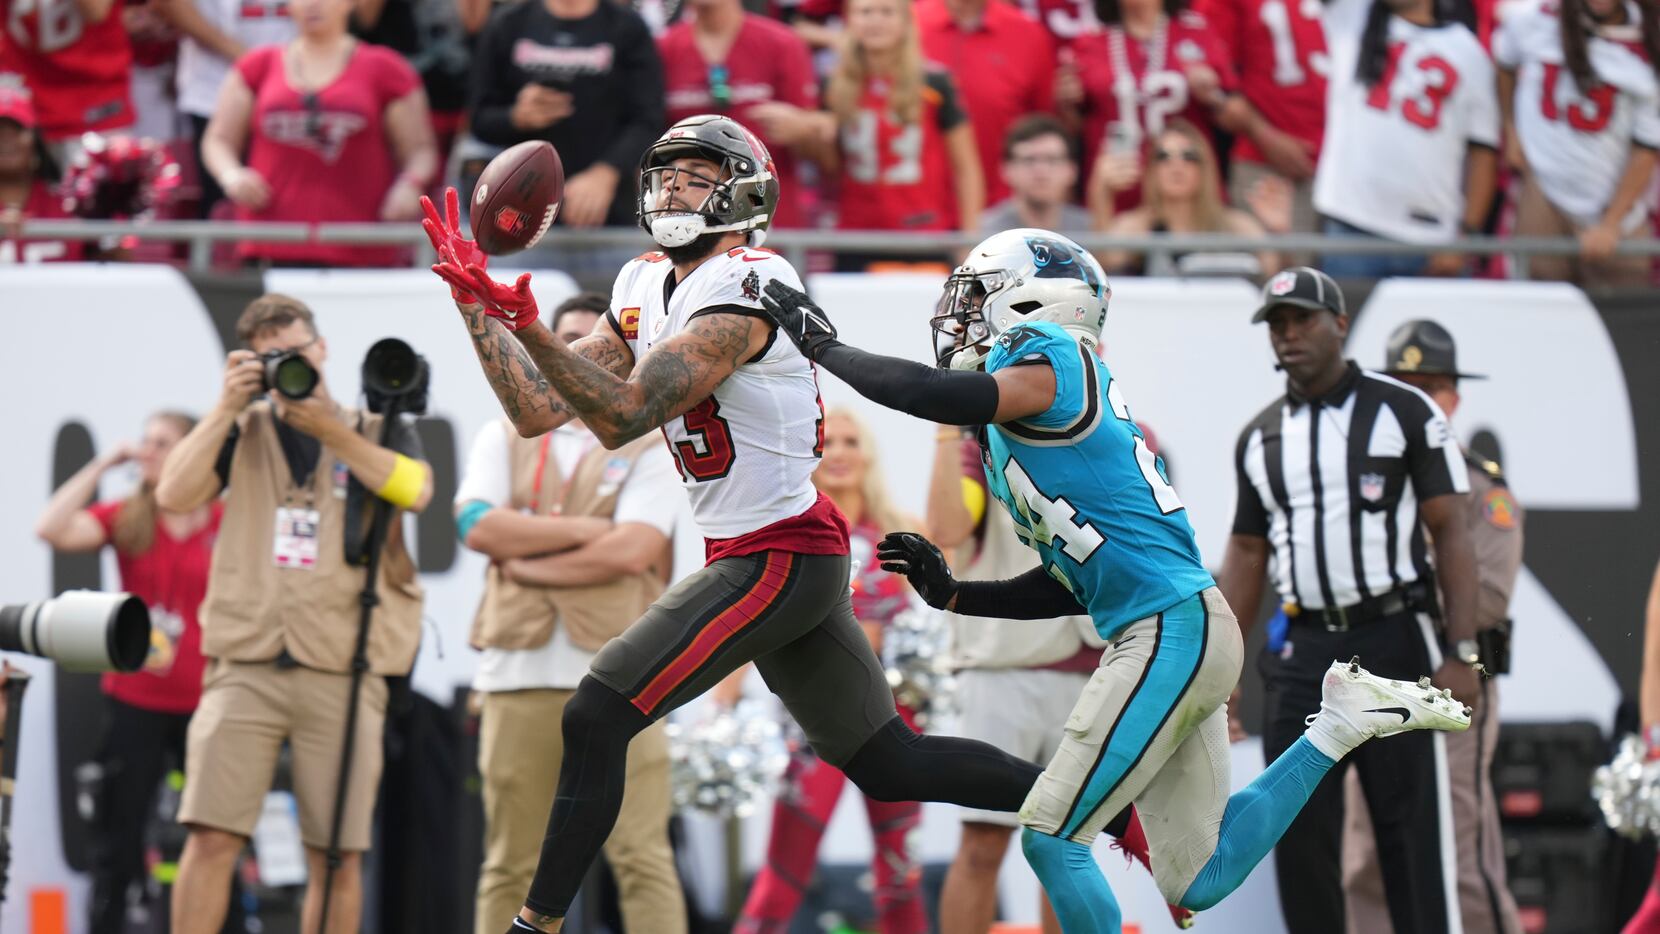 Panthers vs Buccaneers channel, radio station and what time